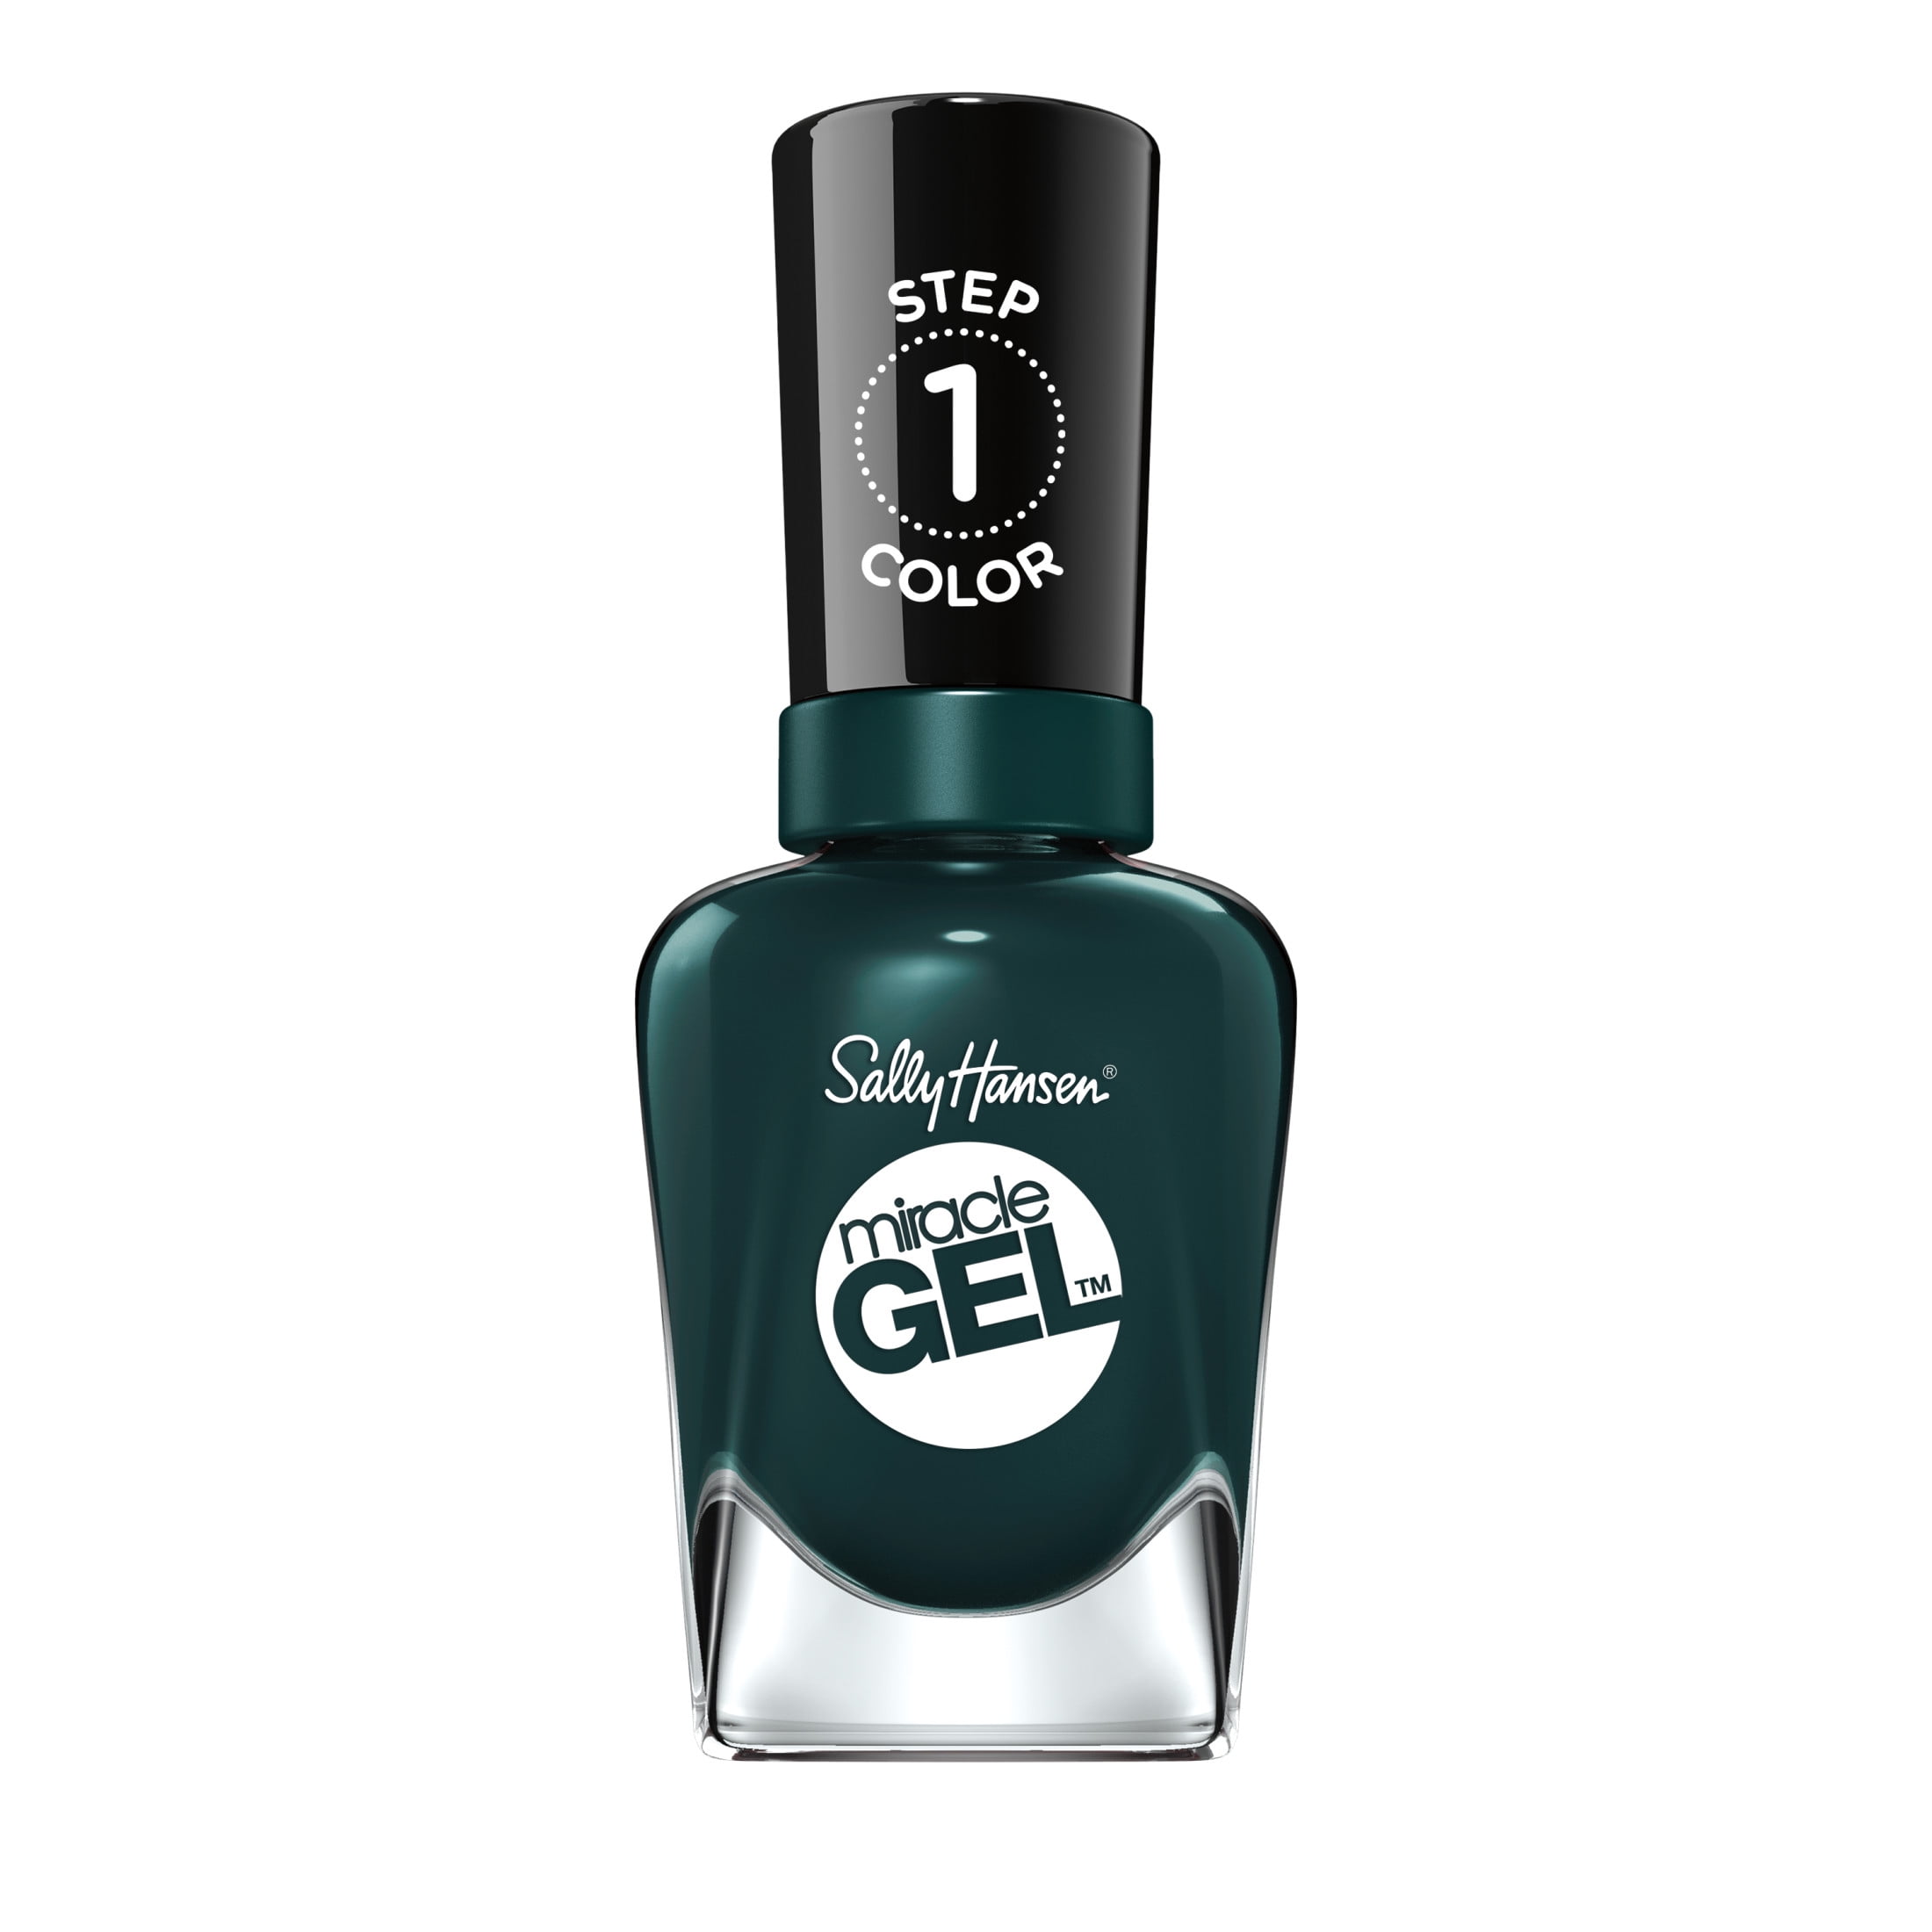 Sally Hansen Miracle Gel Nail Color, Jealous Boyfriend 0.5 oz, At Home Gel Nail Polish, Gel Nail Polish, No UV Lamp Needed, Long Lasting, Chip Resistant